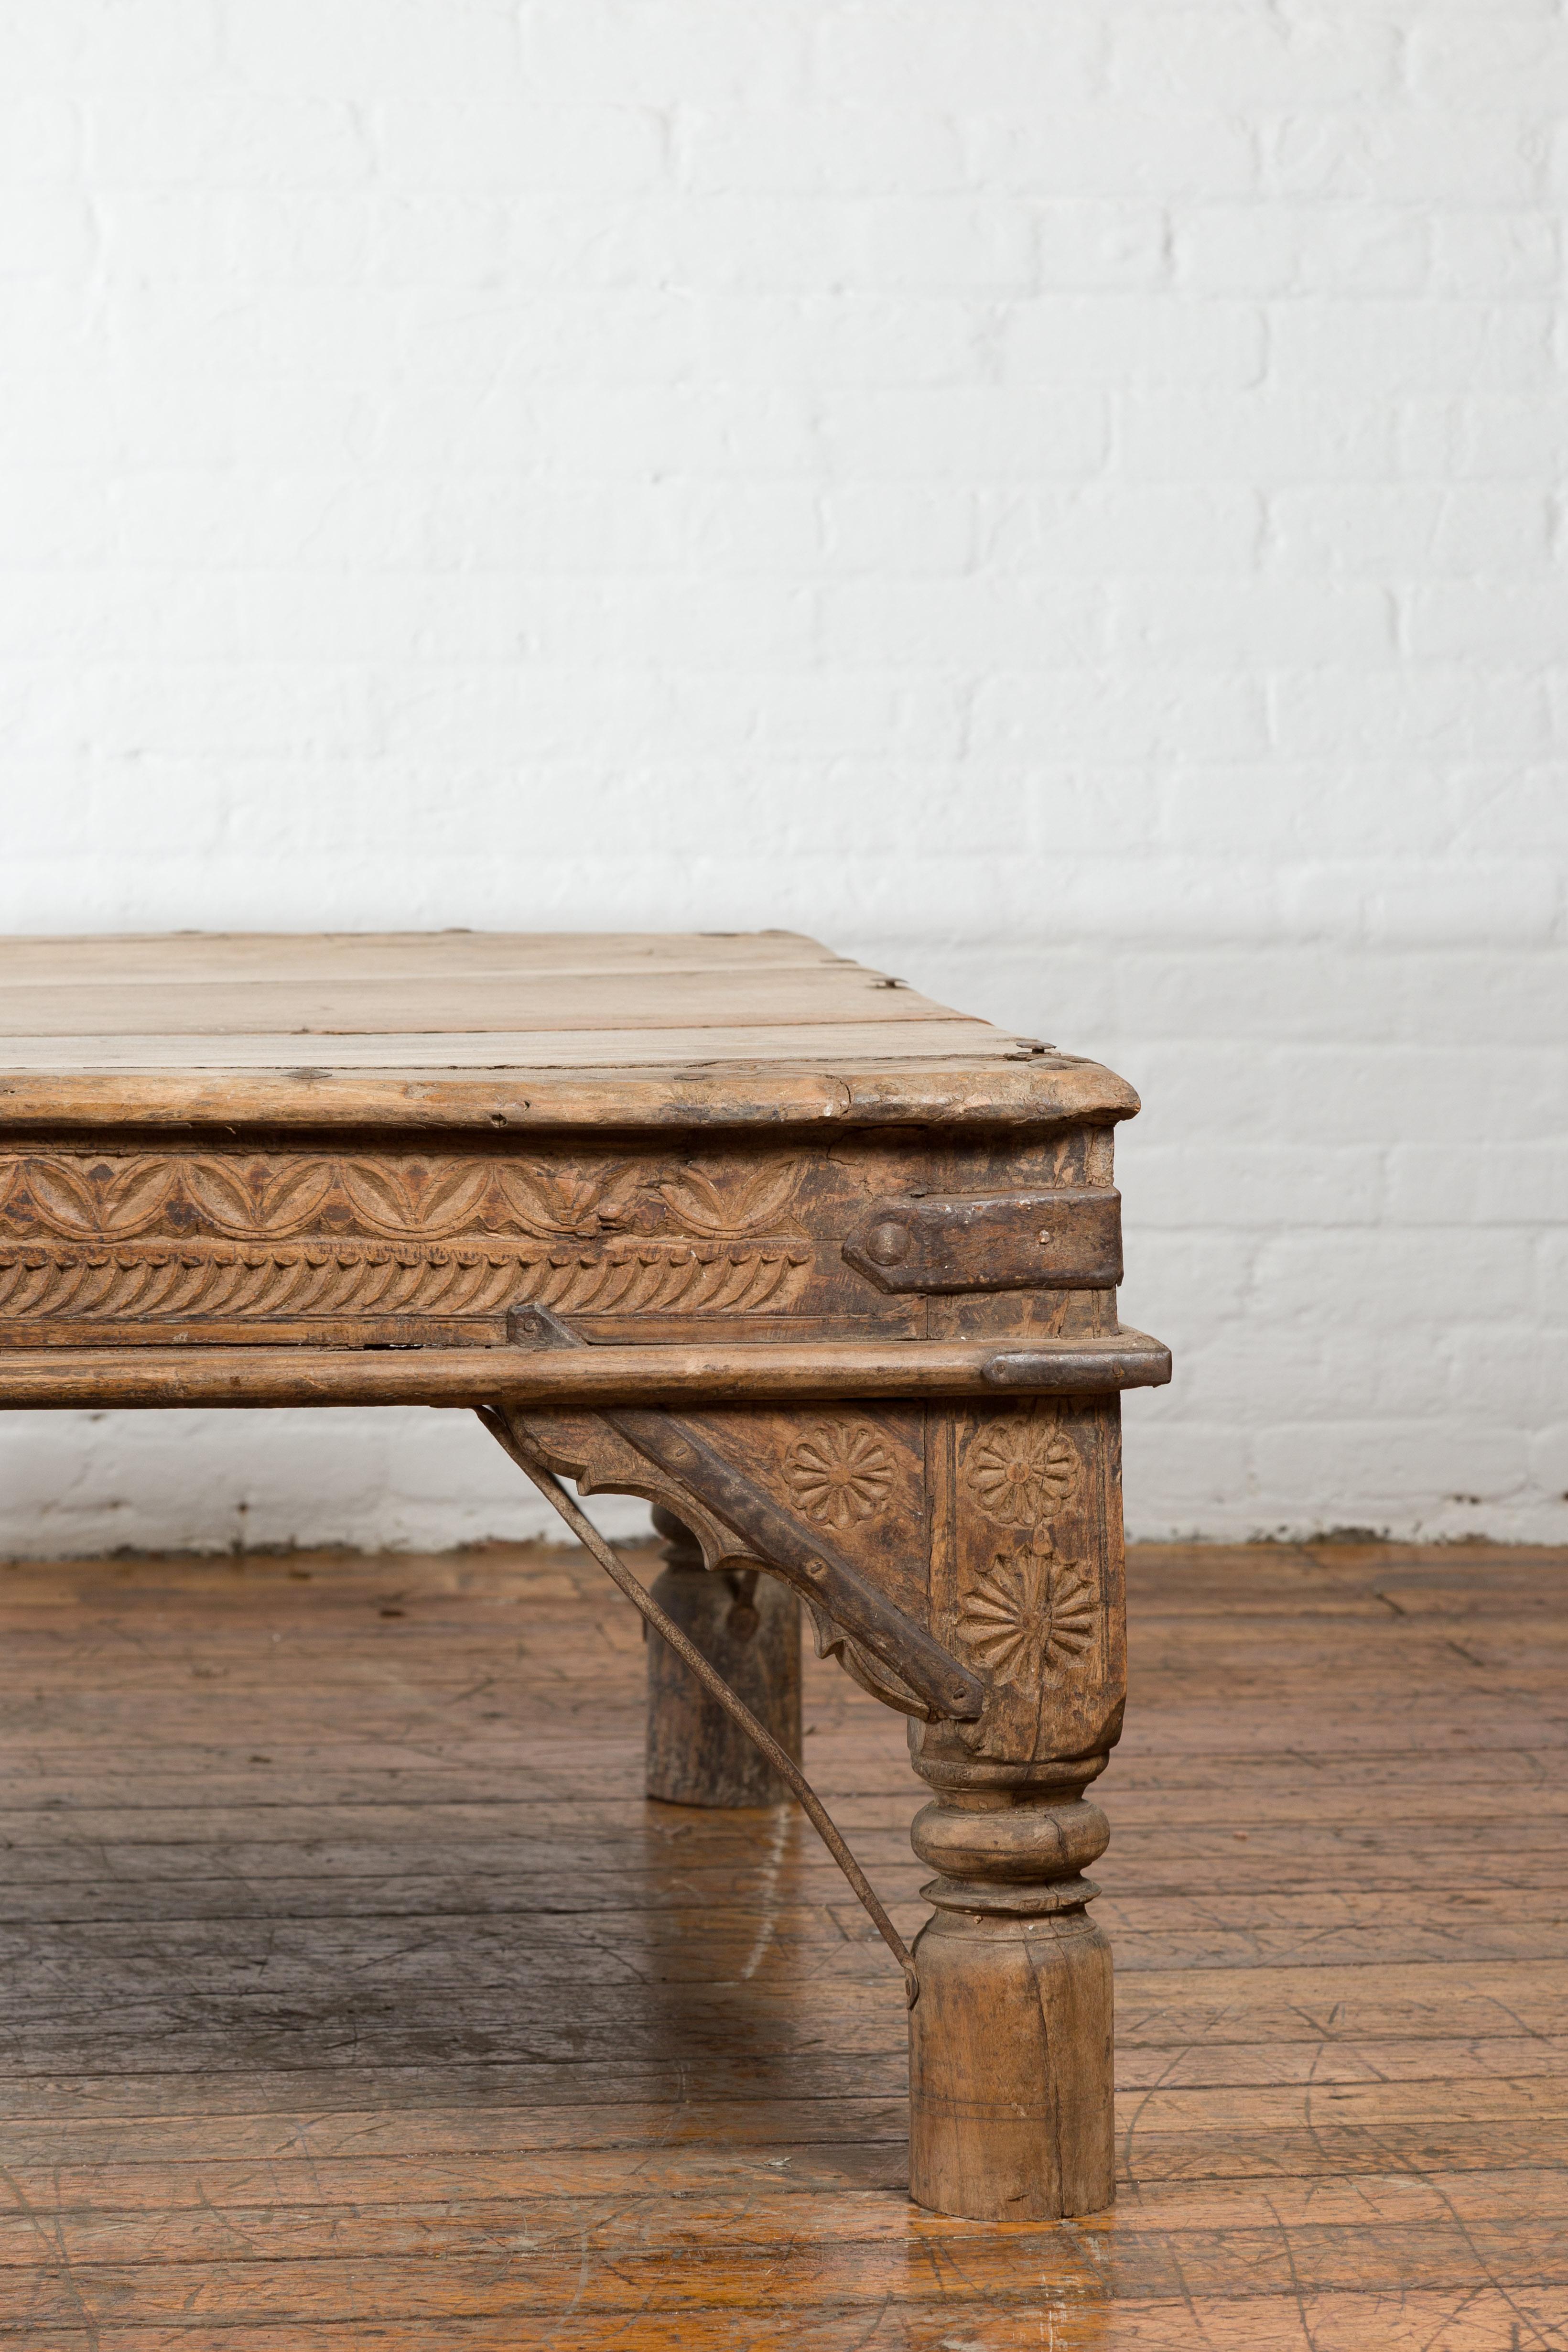 19th Century Oversized Antique Temple Door with Studs Made into a Carved Coffee Table